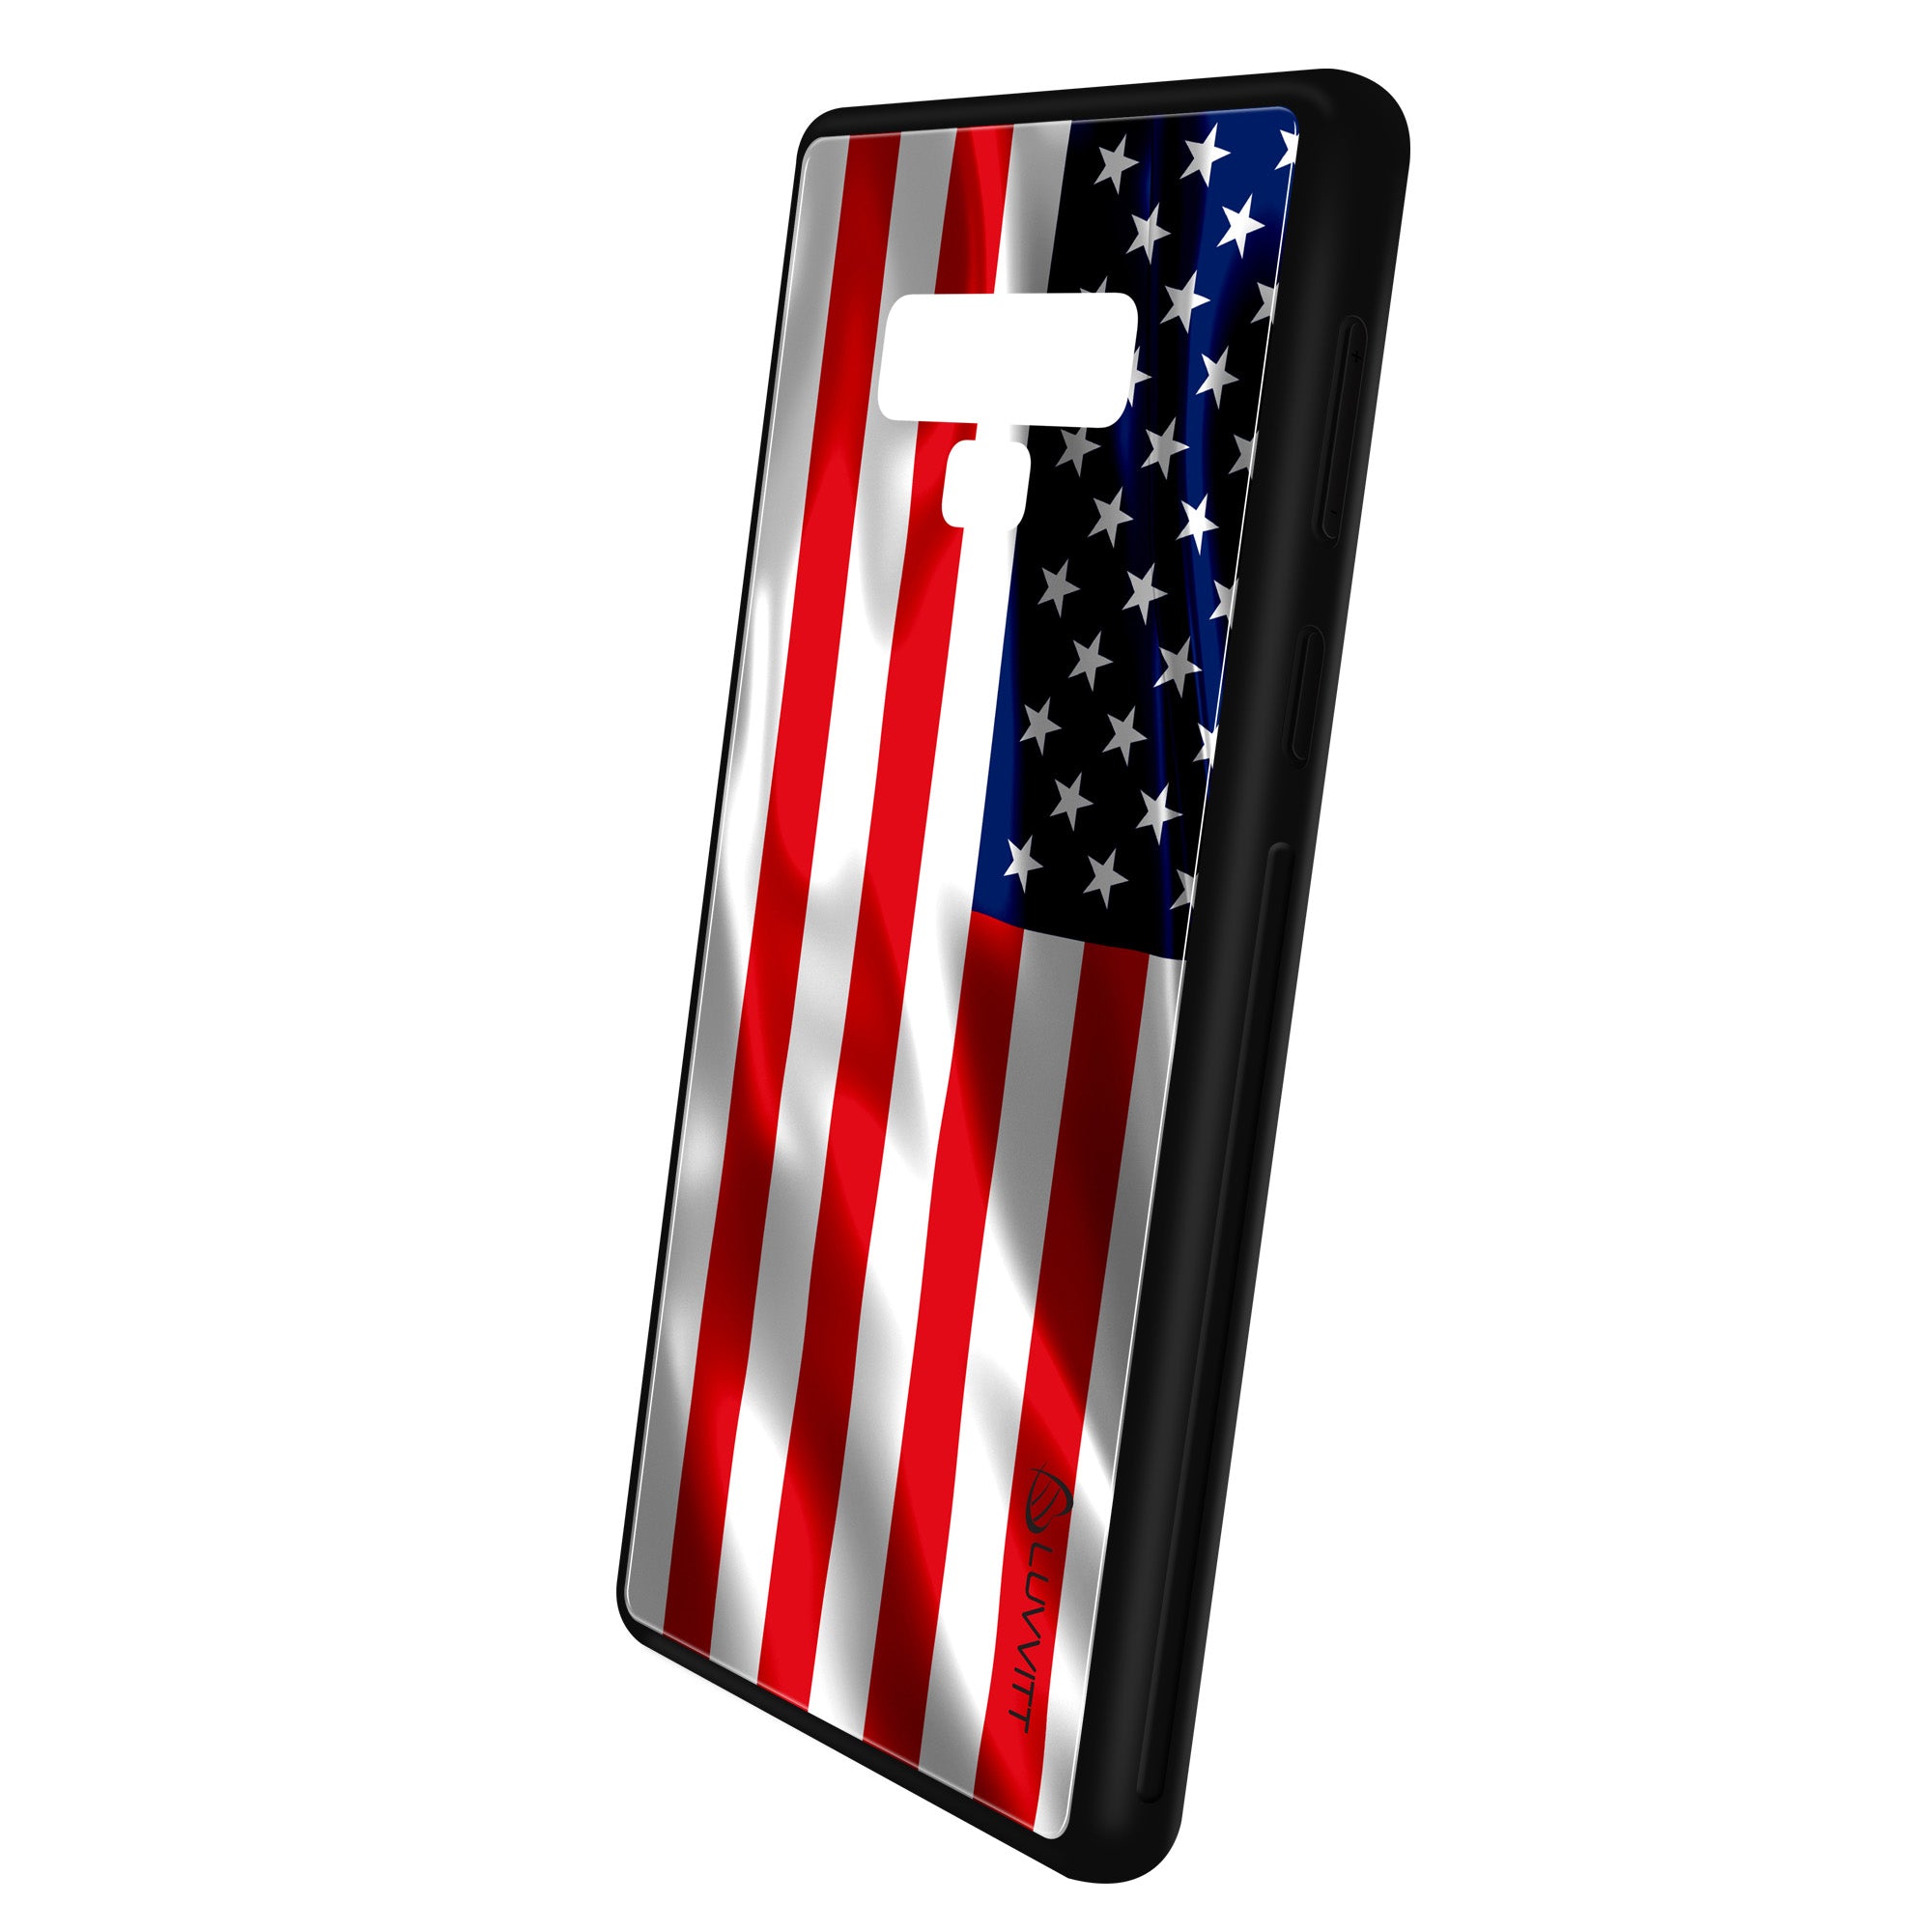 Note 9 Case GLASS Back USA American Flag Back Cover - US United States of America